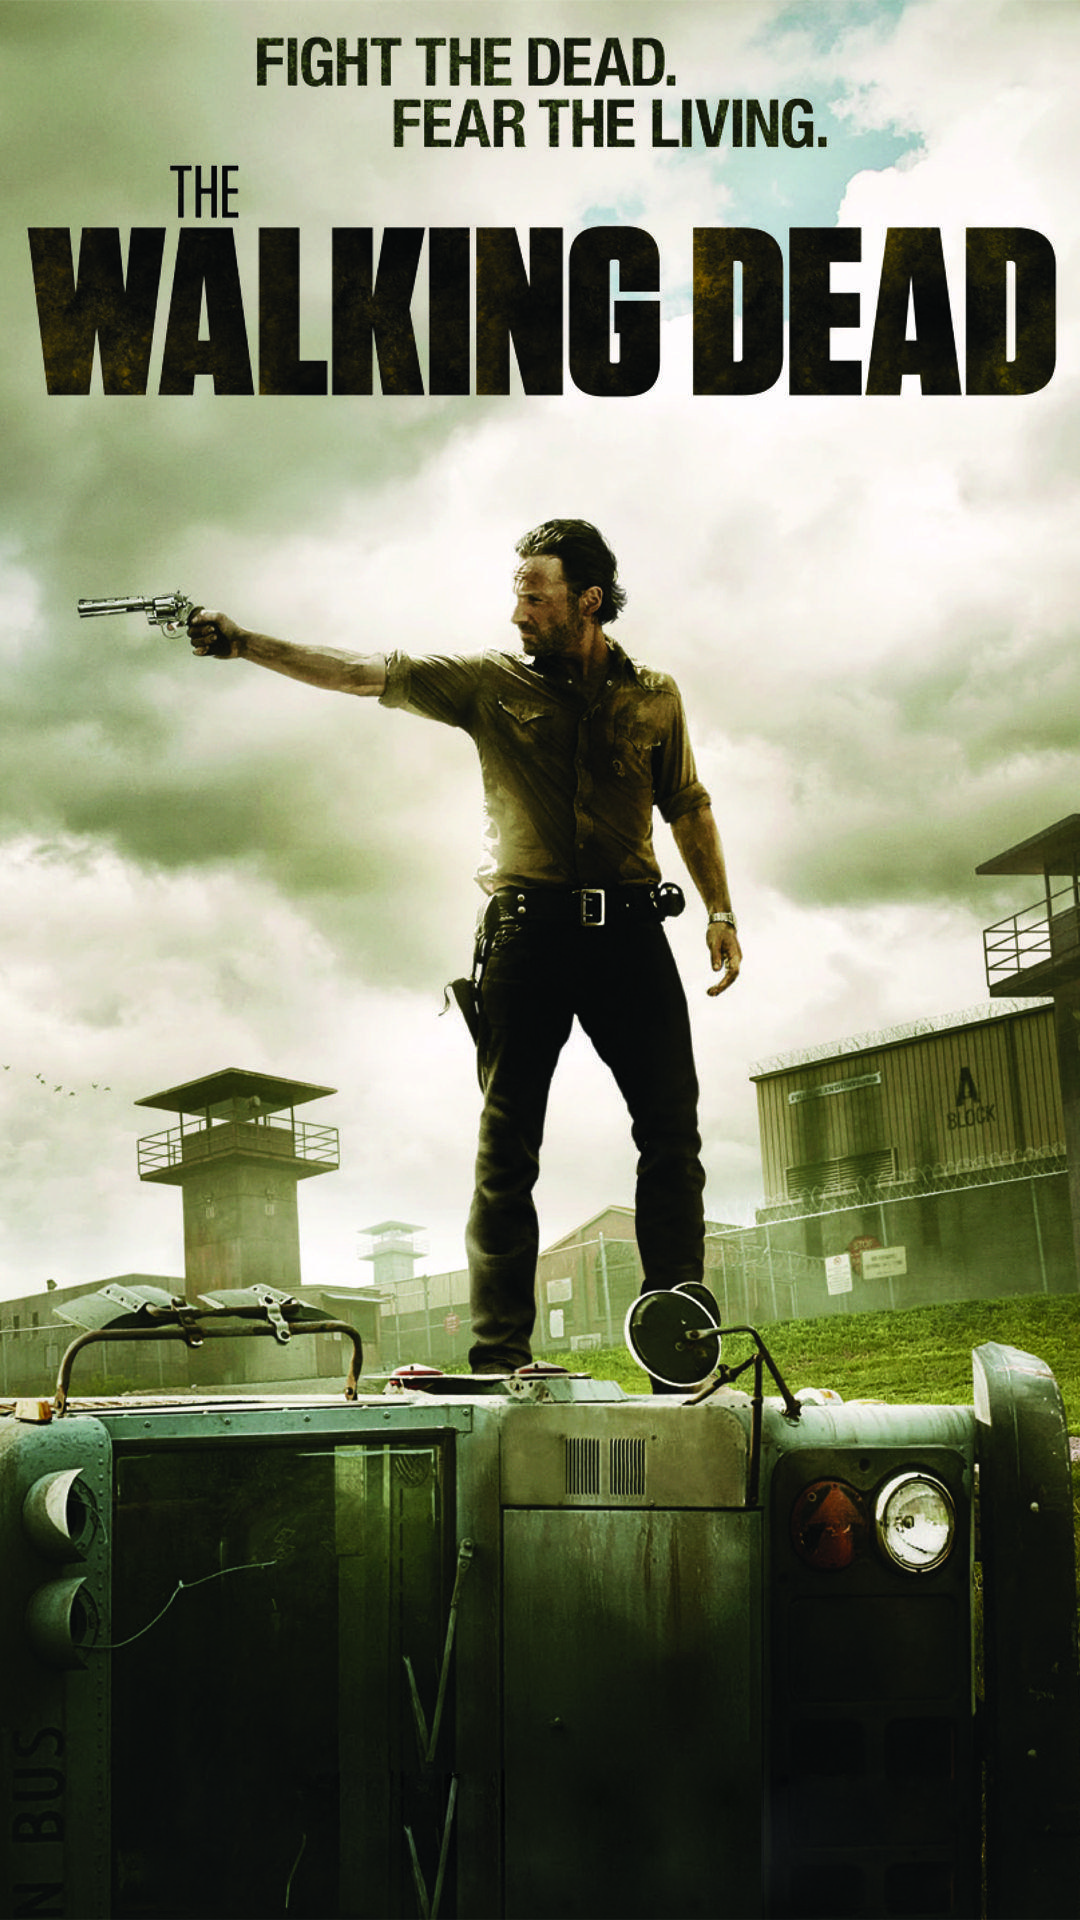 The walking dead htc one wallpaper, free and easy to download